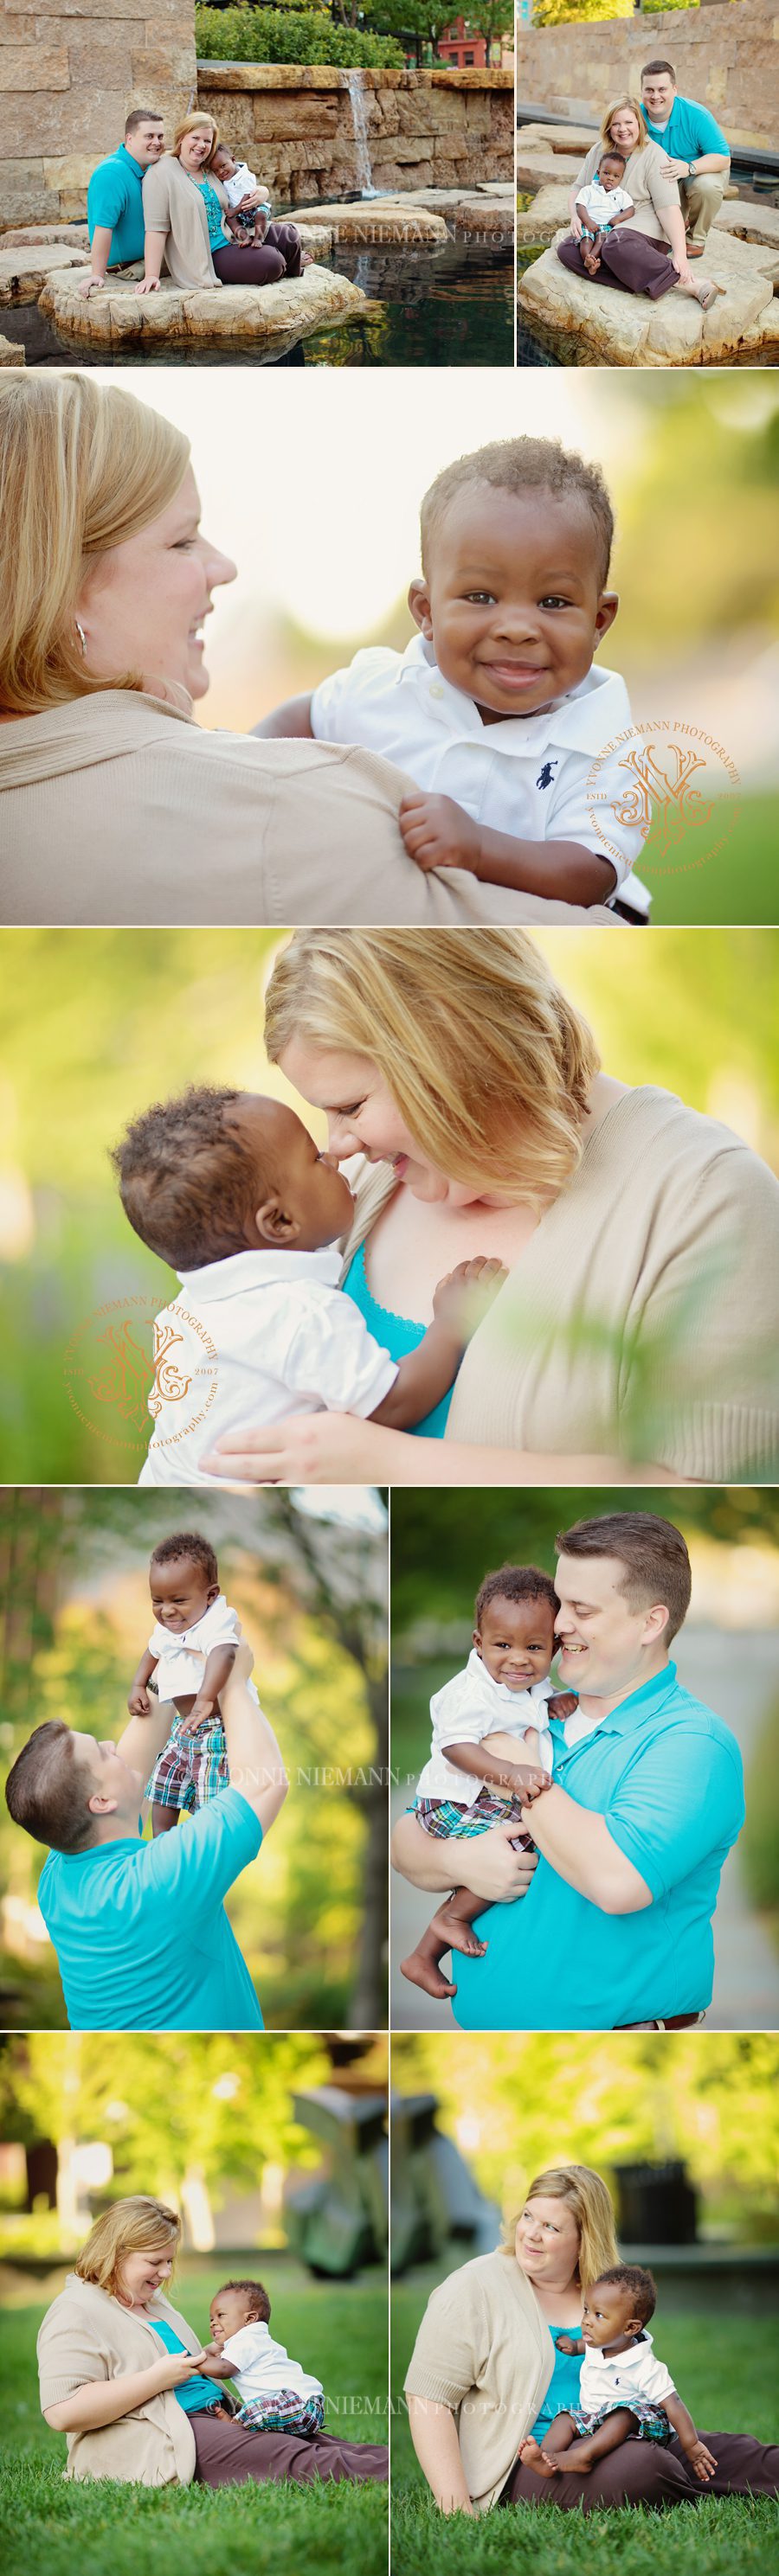 St. Louis City Portraits of a family with adopted baby boy by Yvonne Niemann Photography